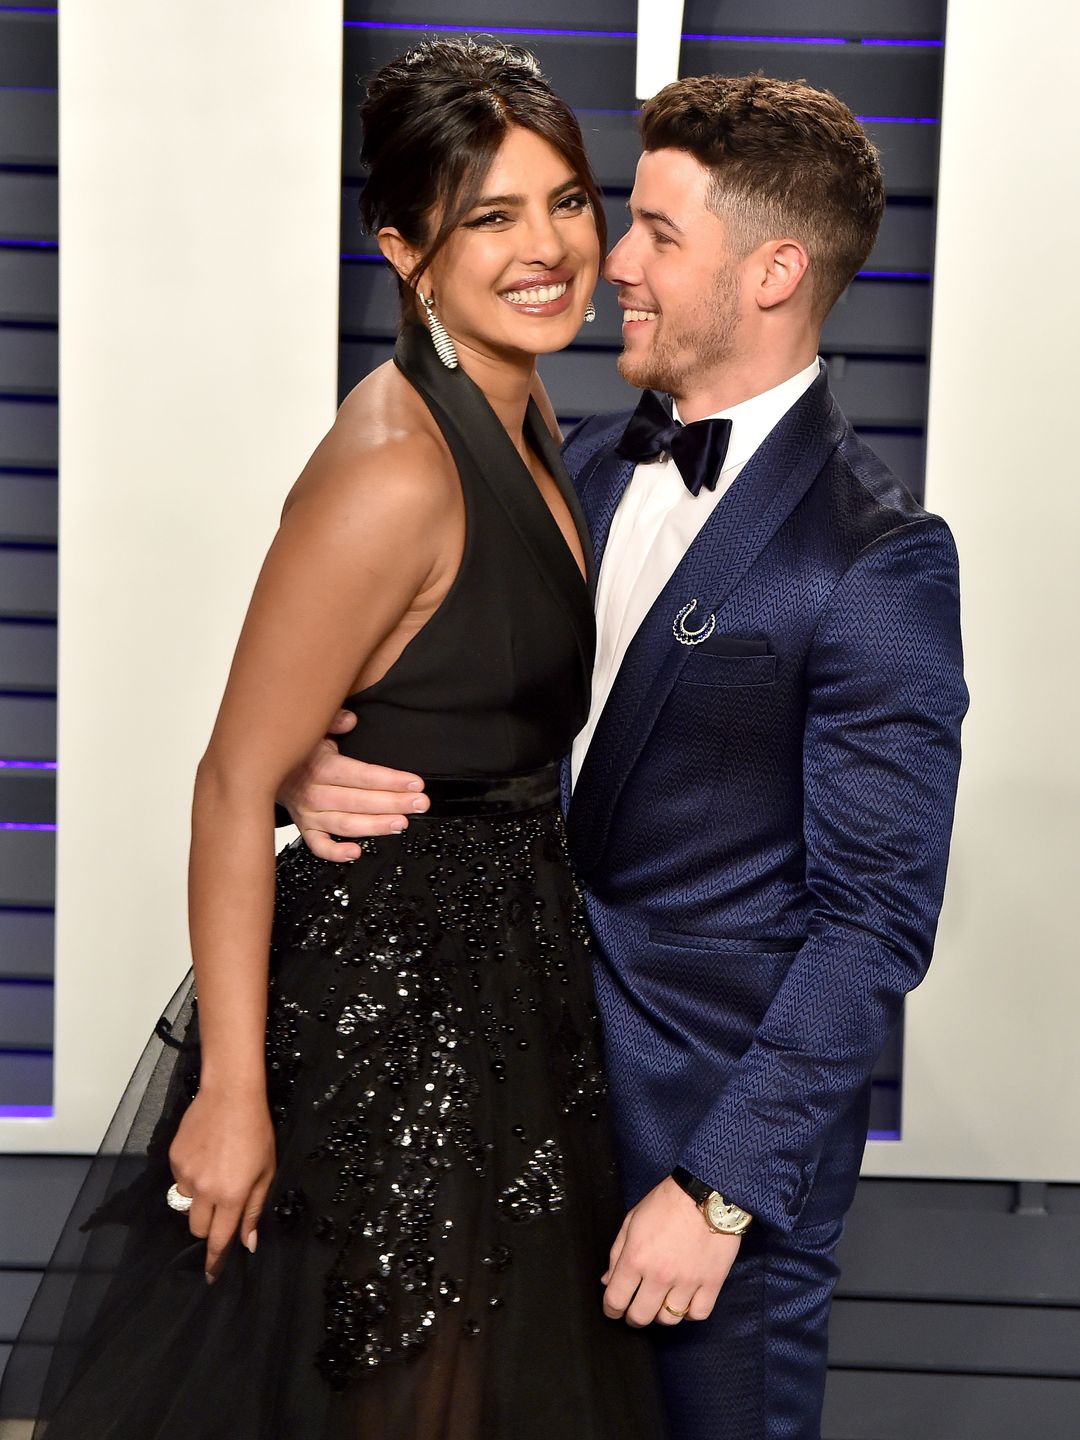 Priyanka and Nick on a red carpet together embracing and smiling